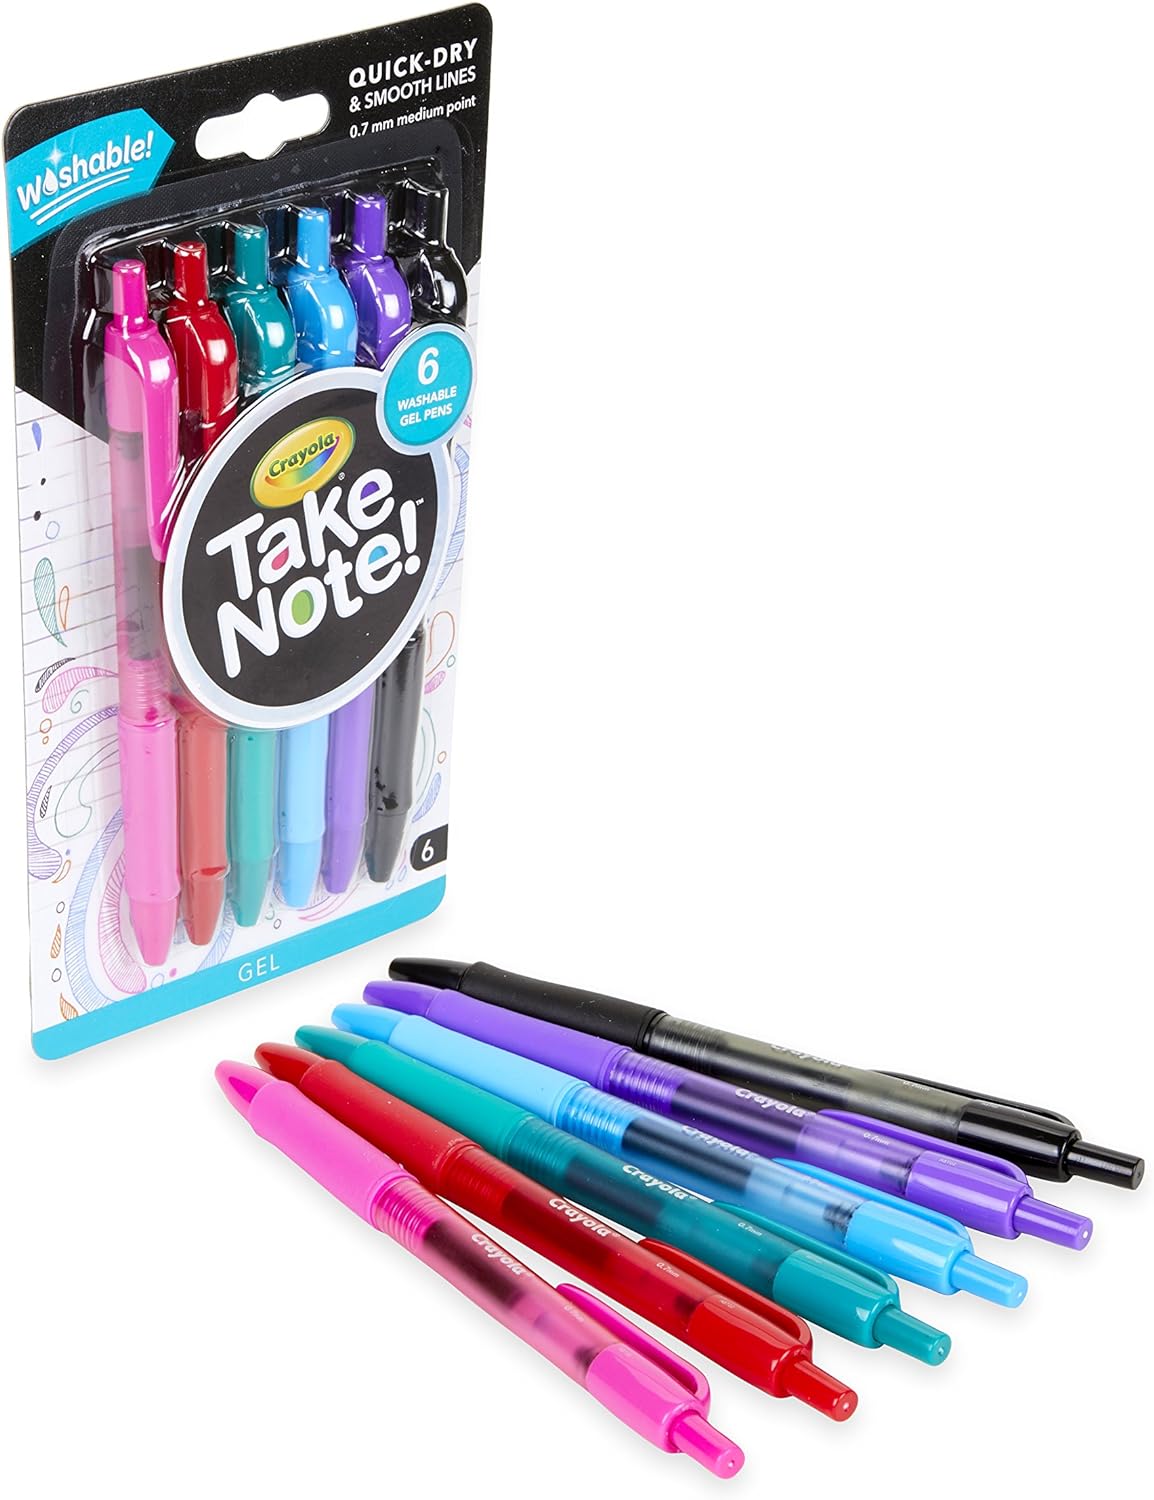 Crayola Take Note Washable Gel Pens - Pack of 6